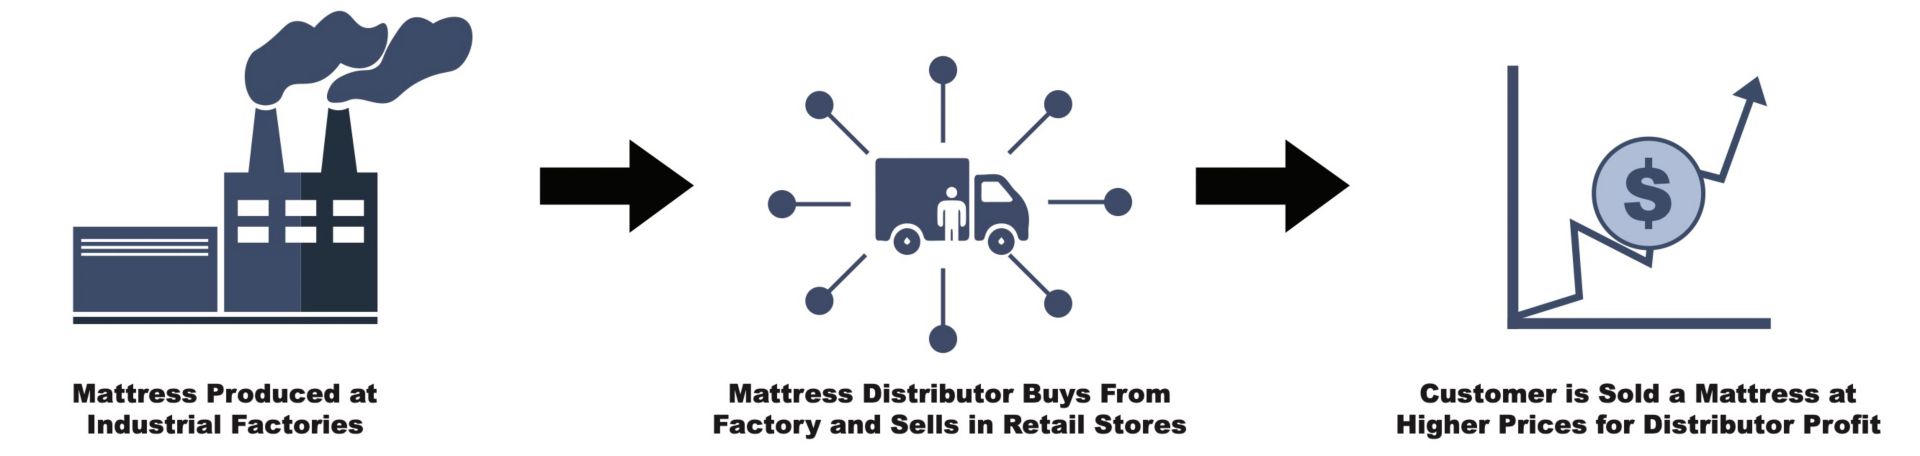 Other Mattress Companies Process: Step 1 Mattress Produced at Industrial Factories, Step 2 Mattress Distributor Buys From Factory and Sells in Retail Stores, Step 3 Customer is Sold a Mattress at Higher Prices for Distributor Profit